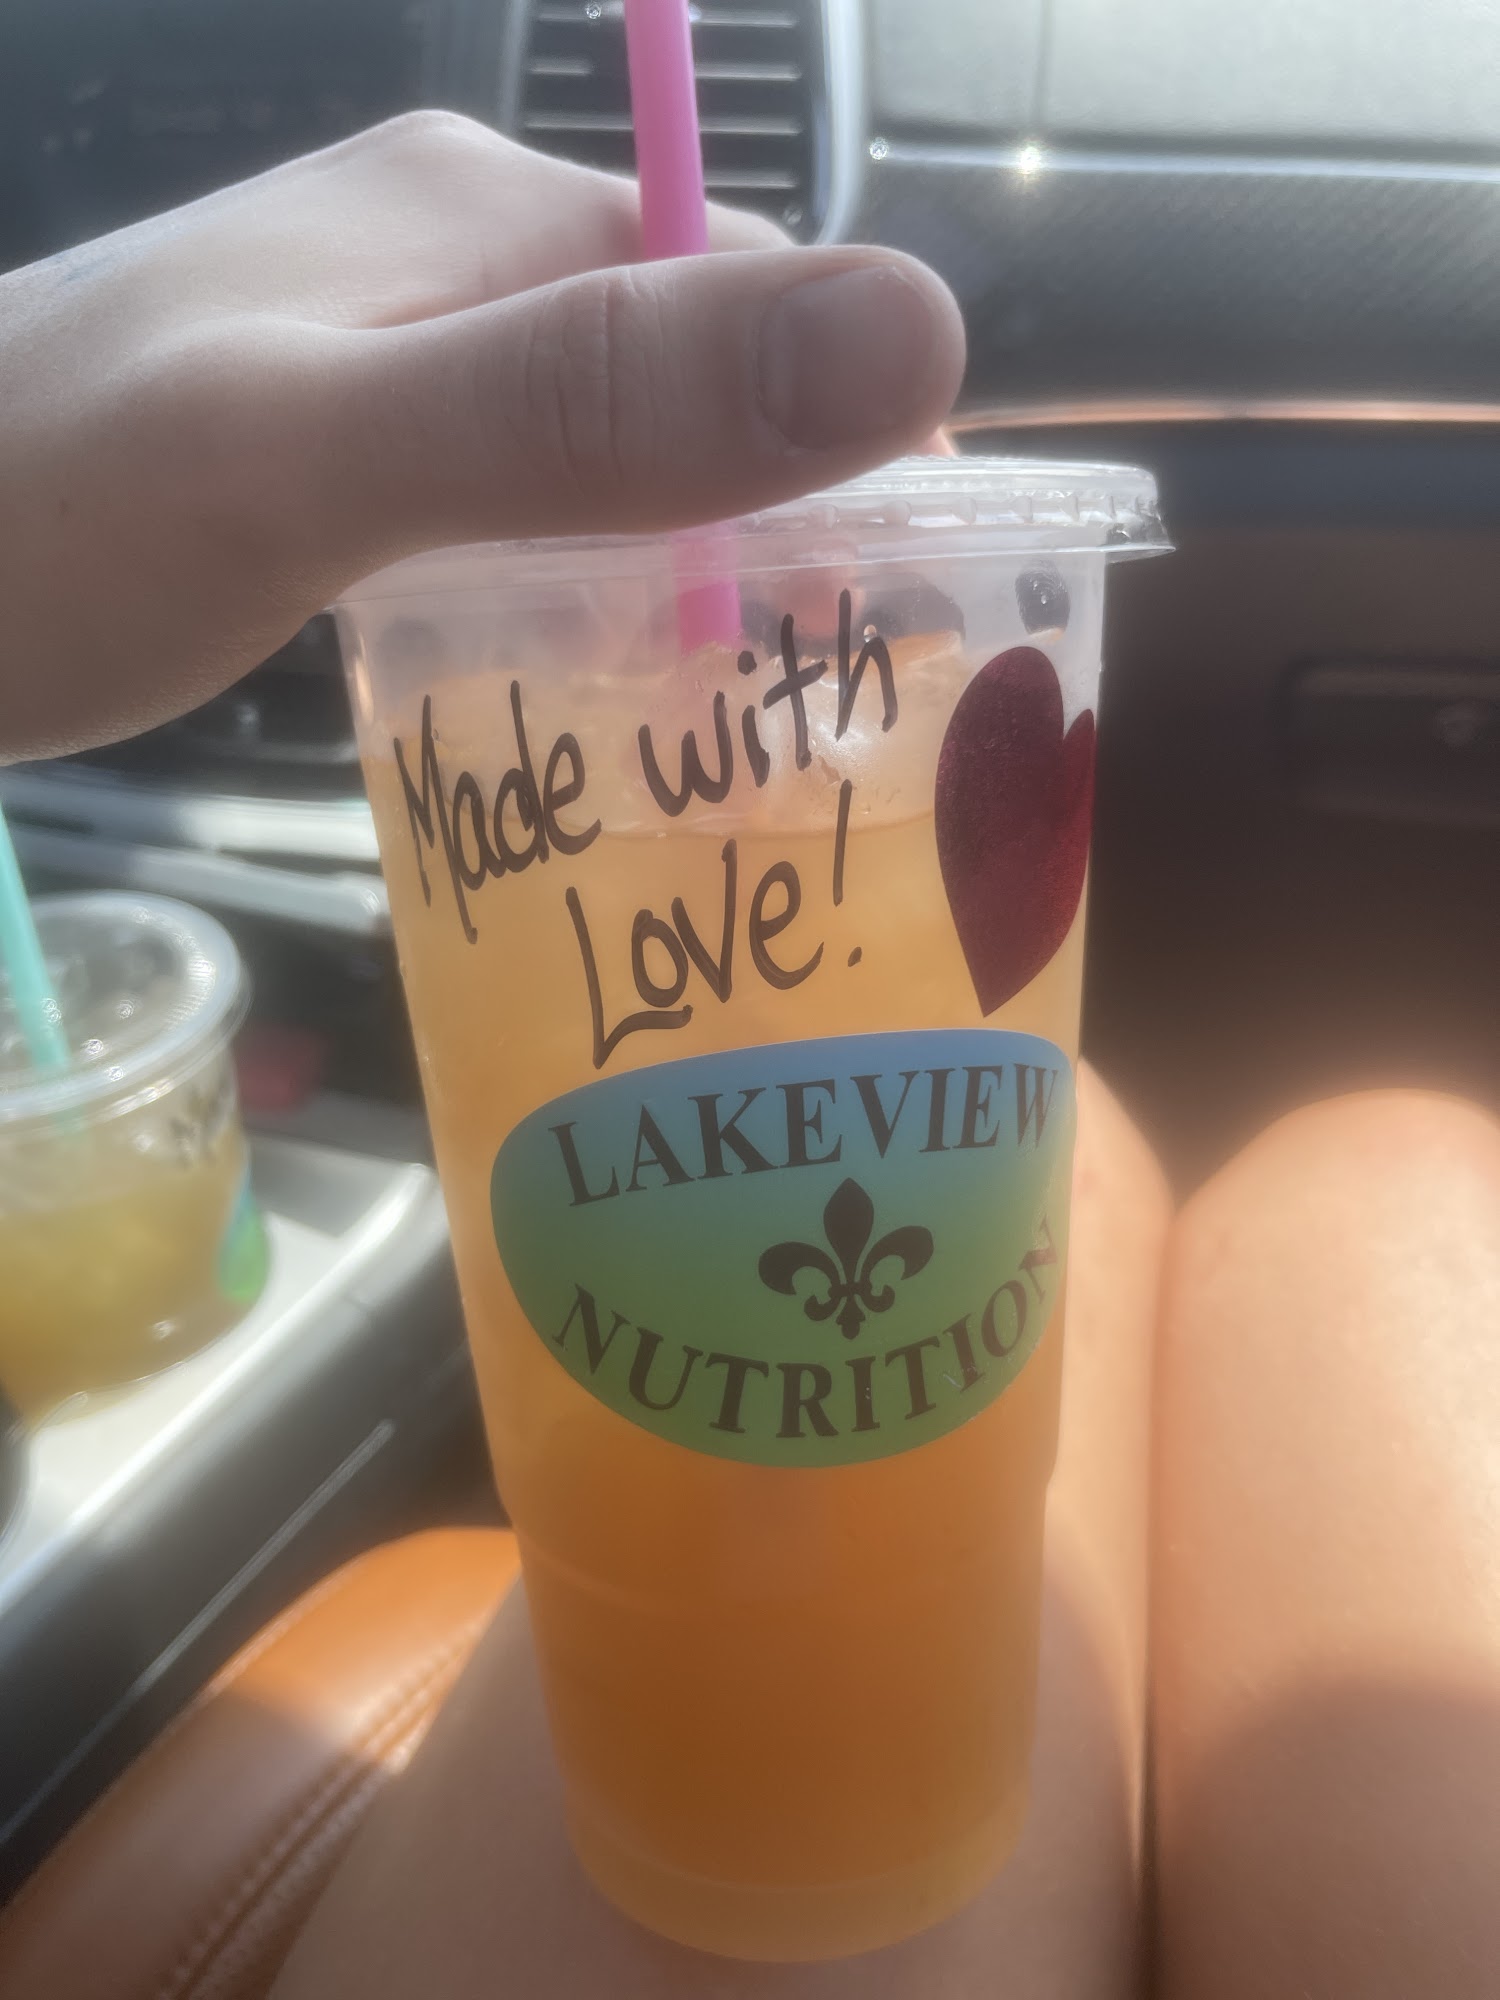 Lakeview Nutrition